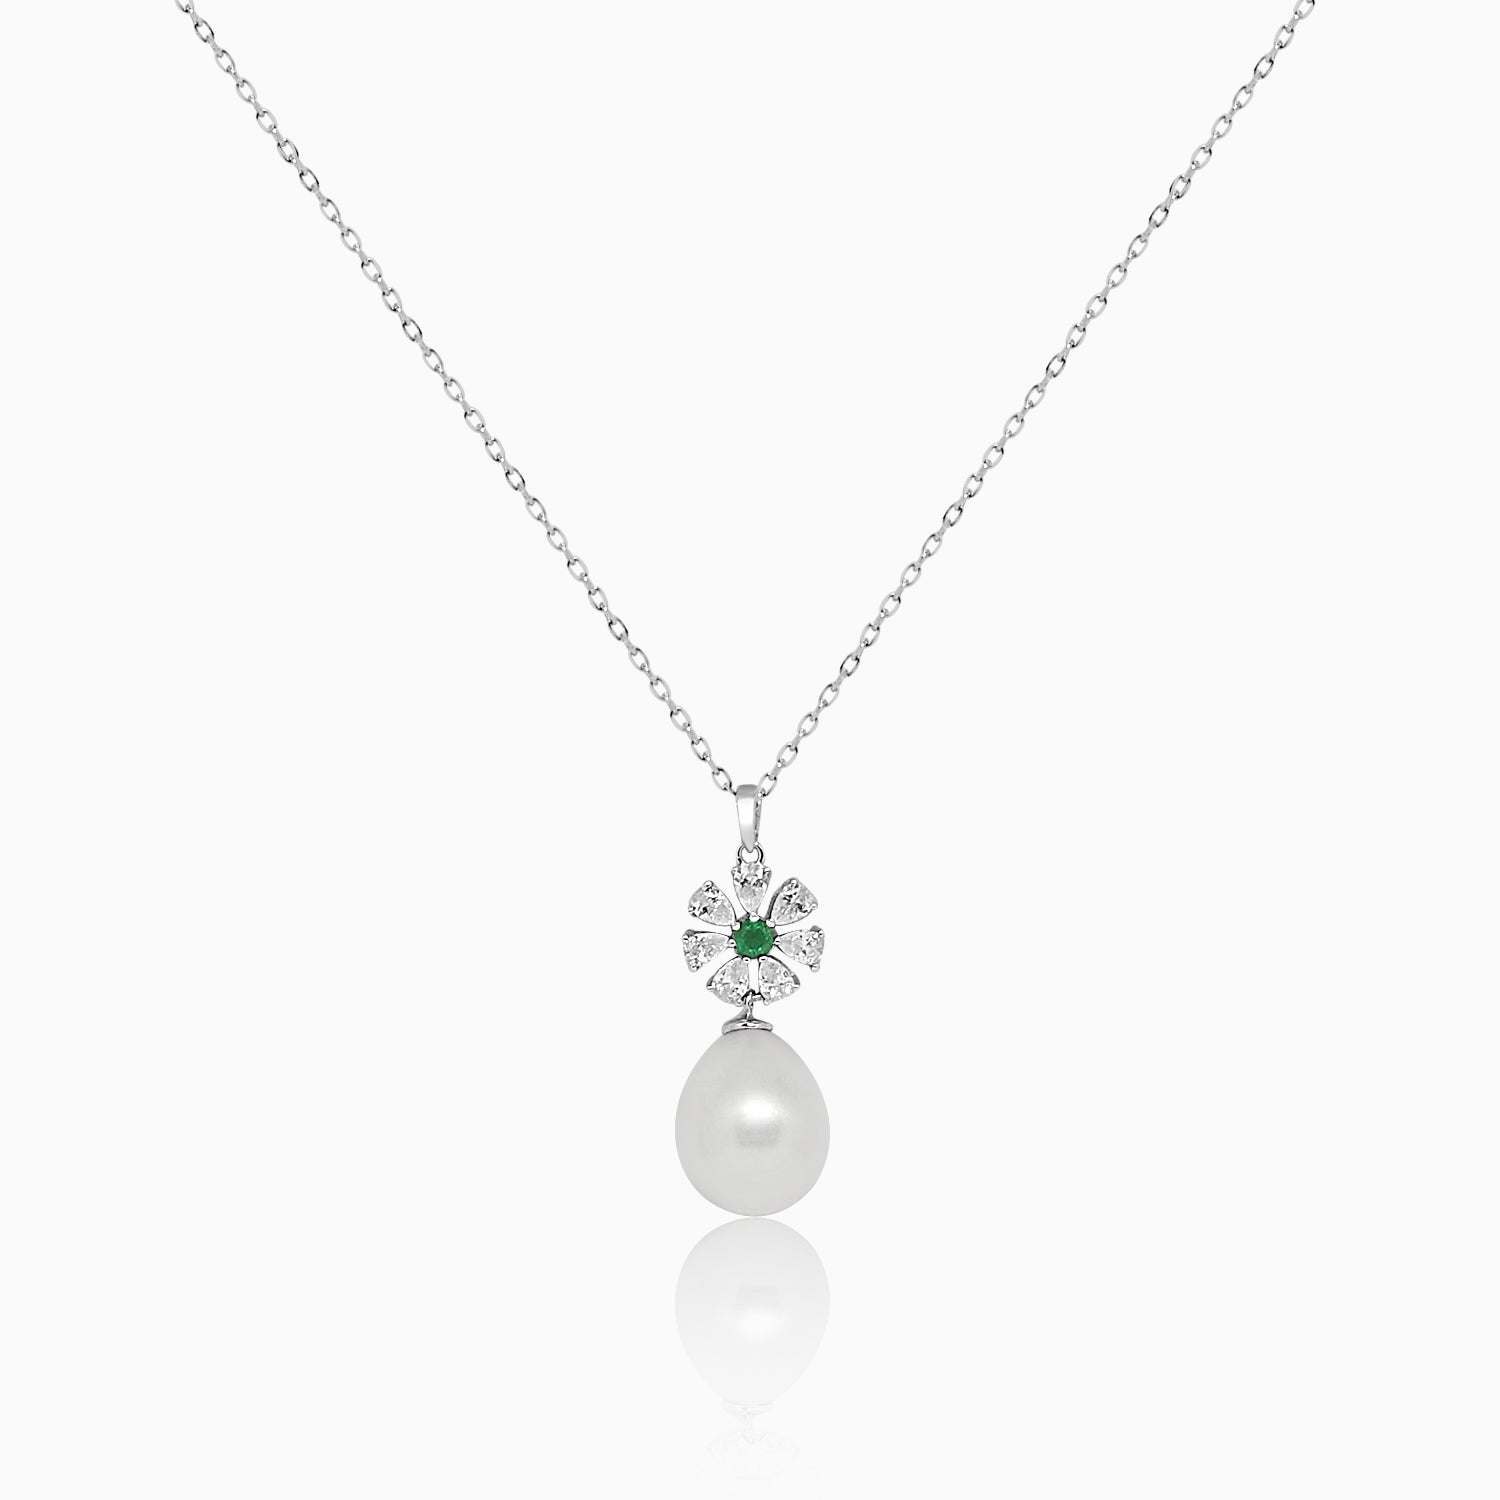 Silver Dangling Emerald and Pearl Flower Necklace